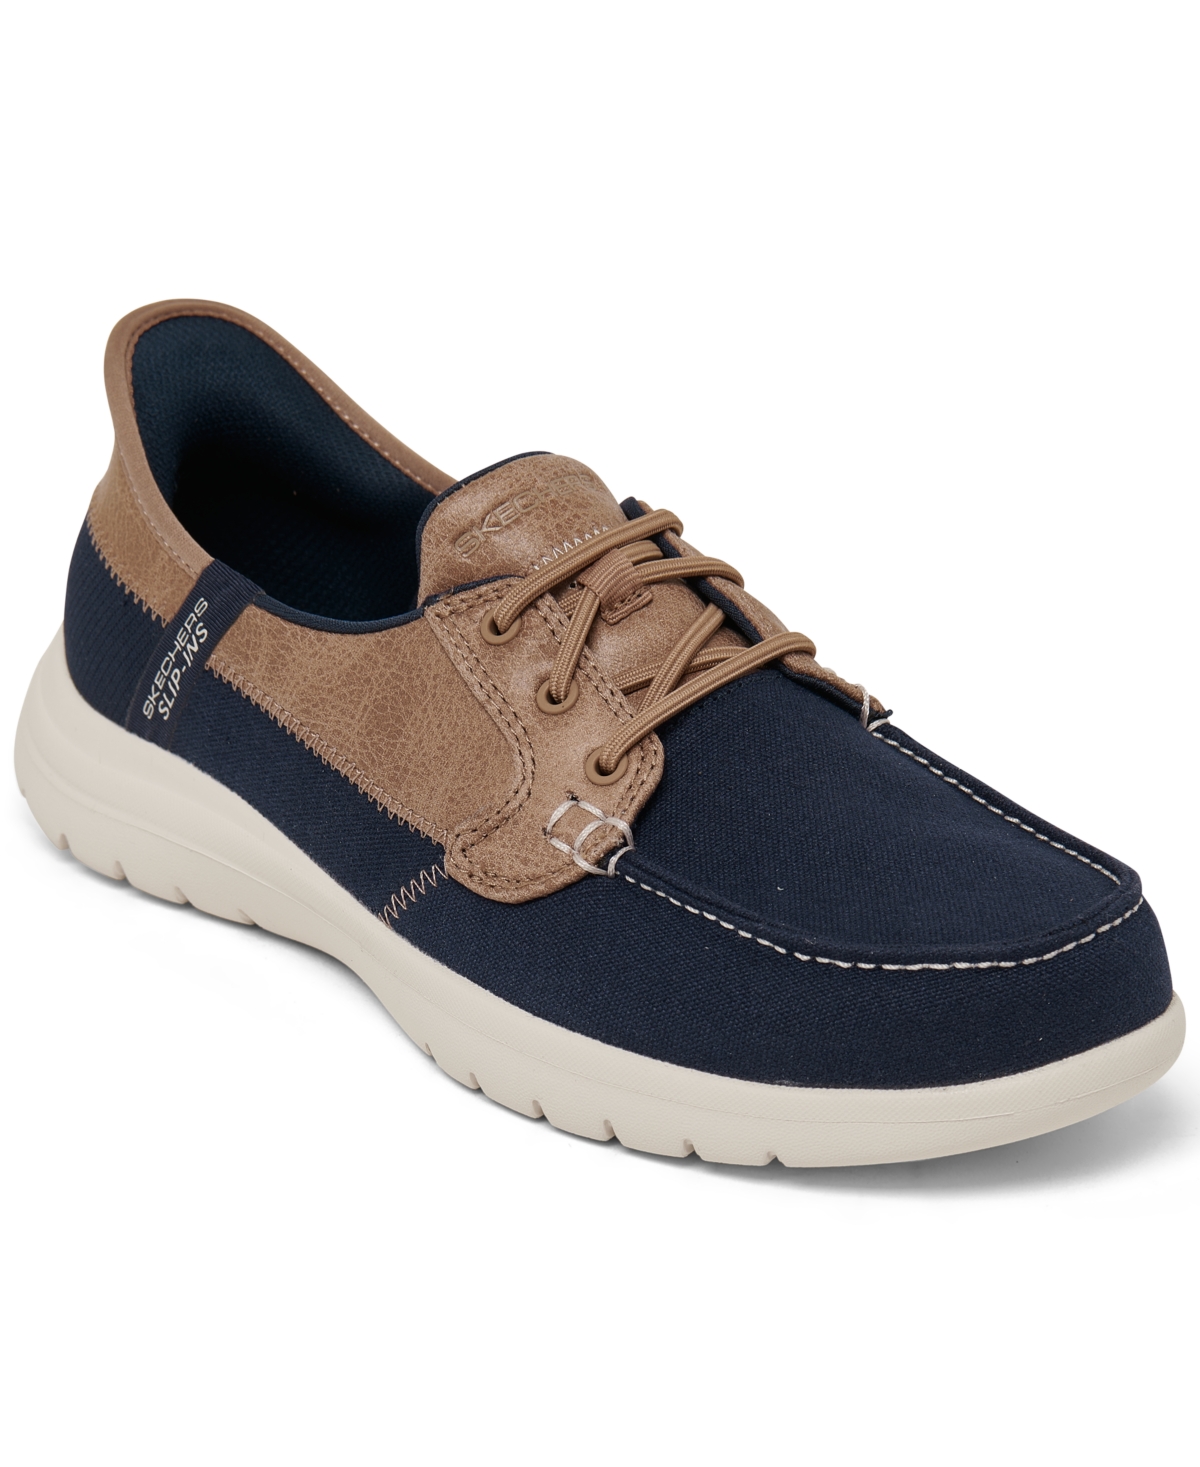 Women's Slip-Ins-On-the-go Flex-Palmilla Casual Sneakers from Finish Line - Navy